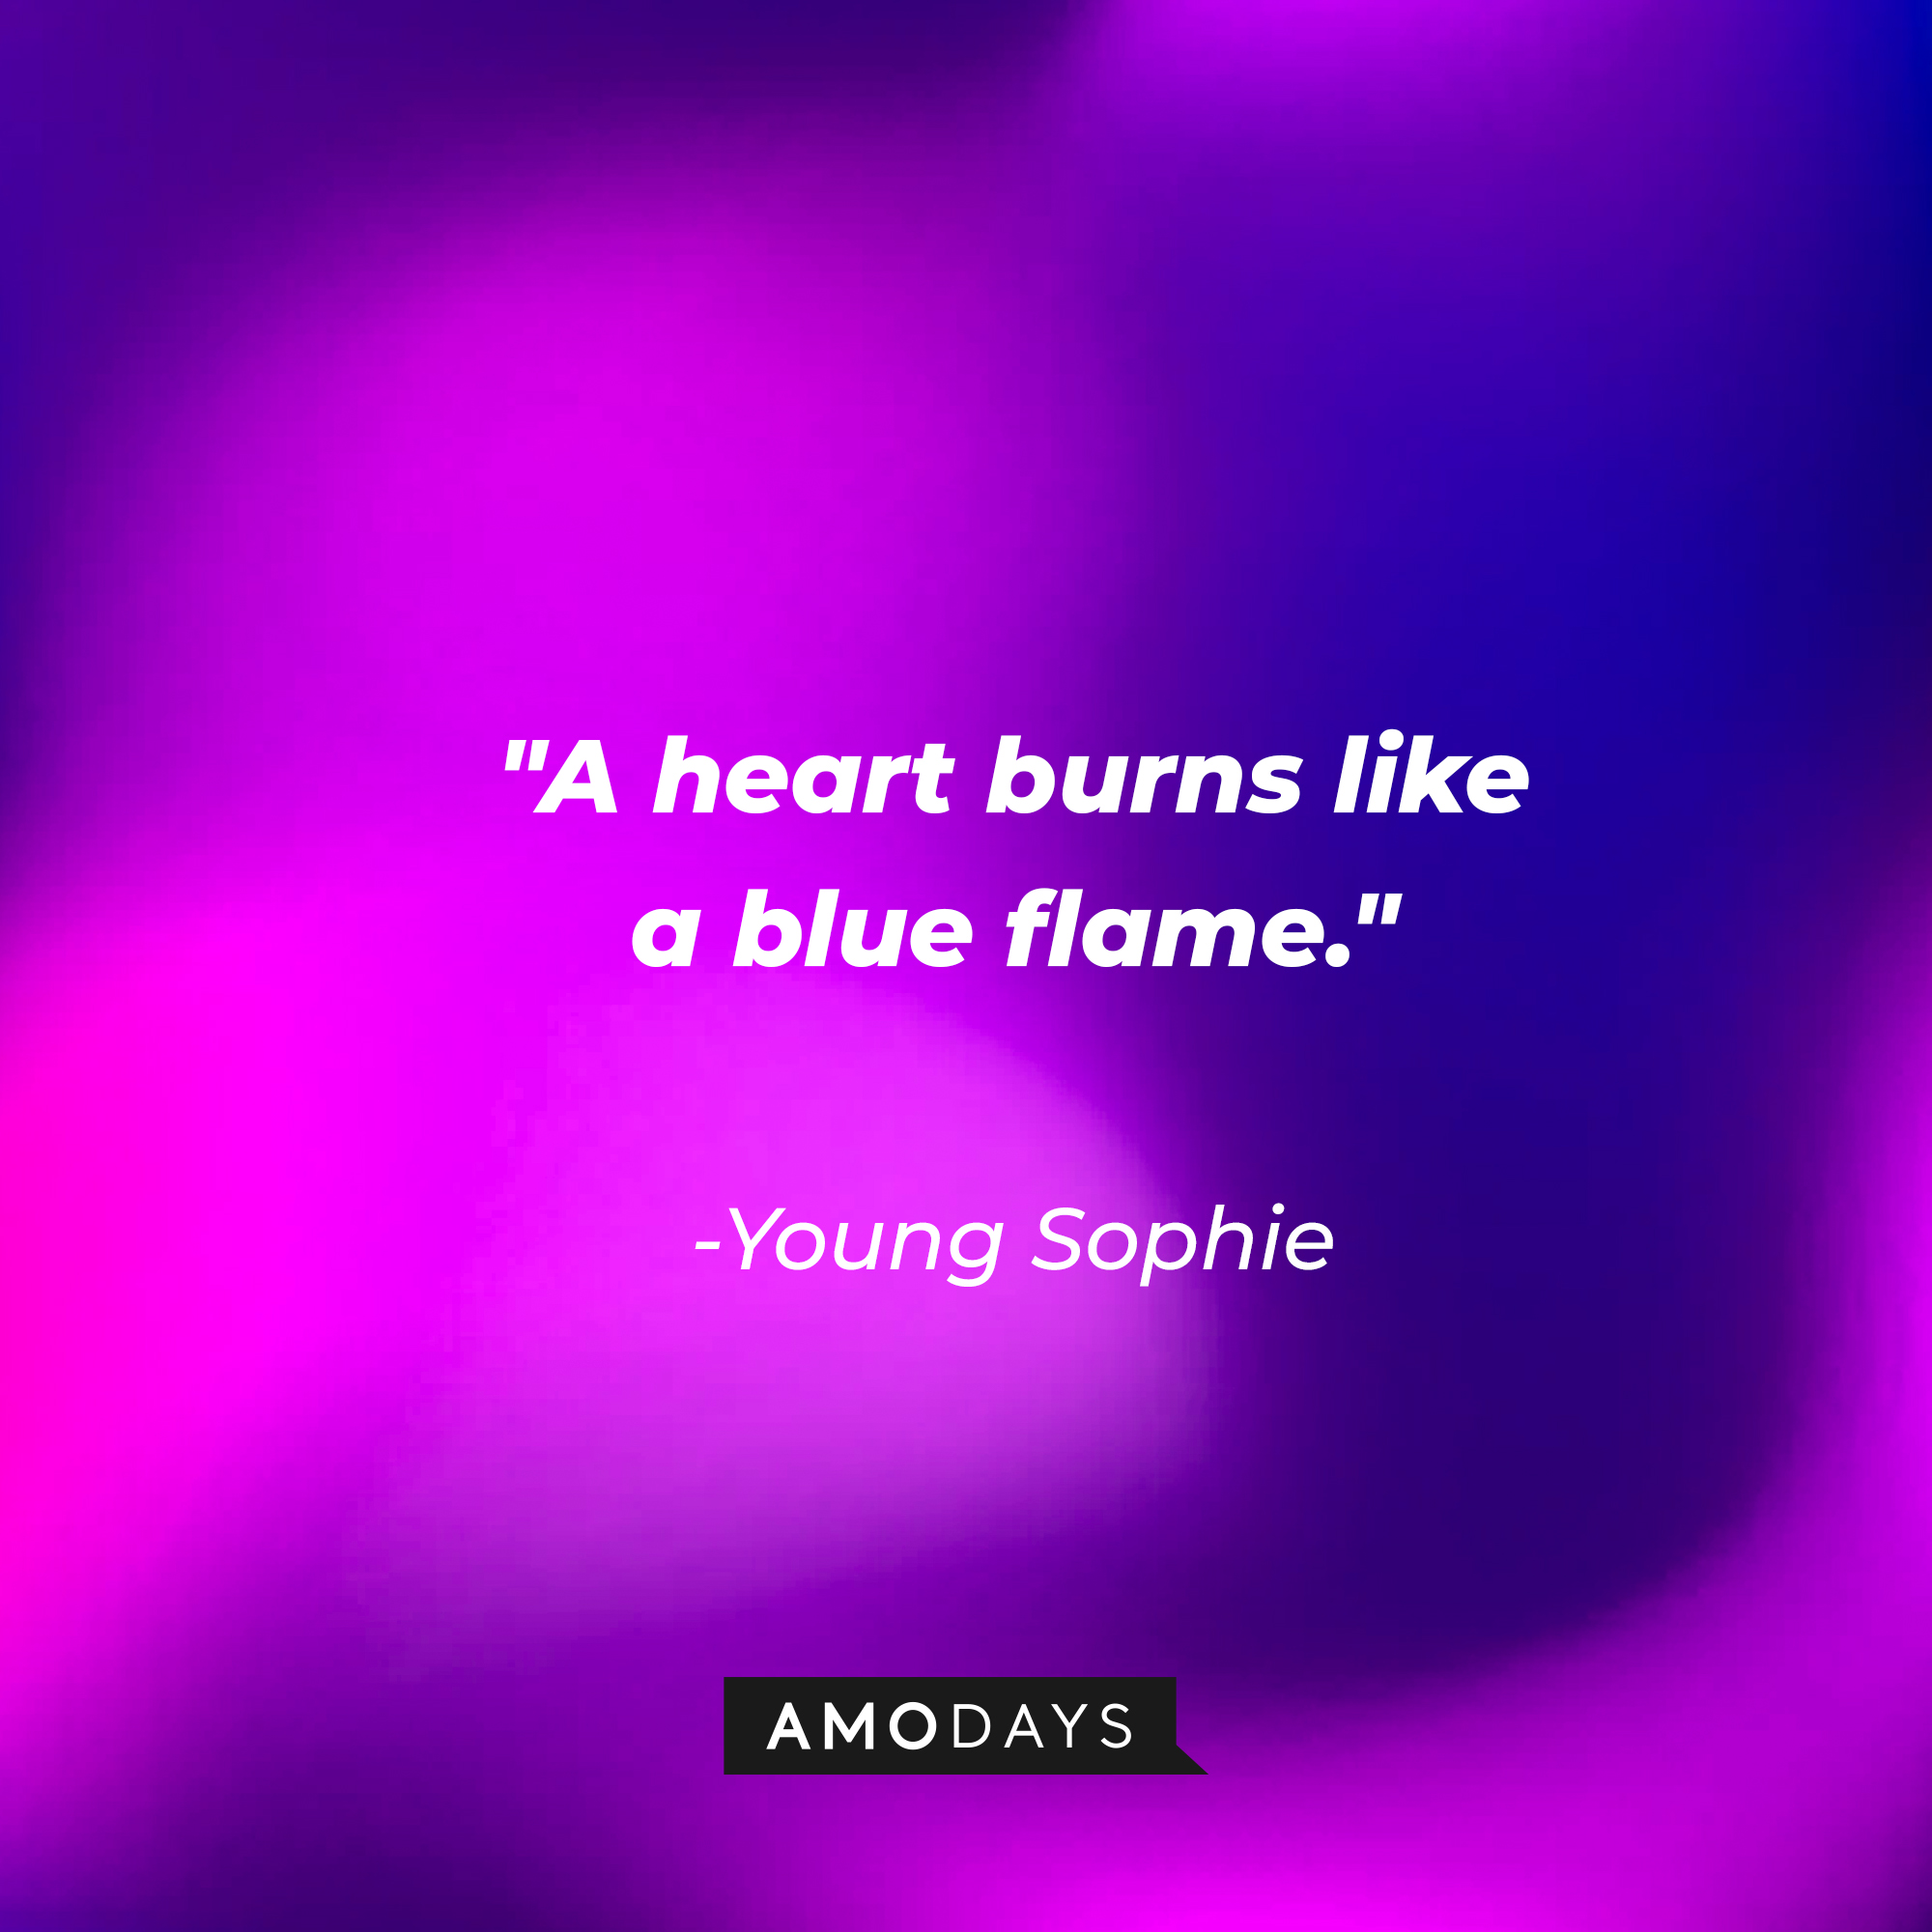 Young Sophie's quote: "A heart burns like a blue flame." | Source: Amodays